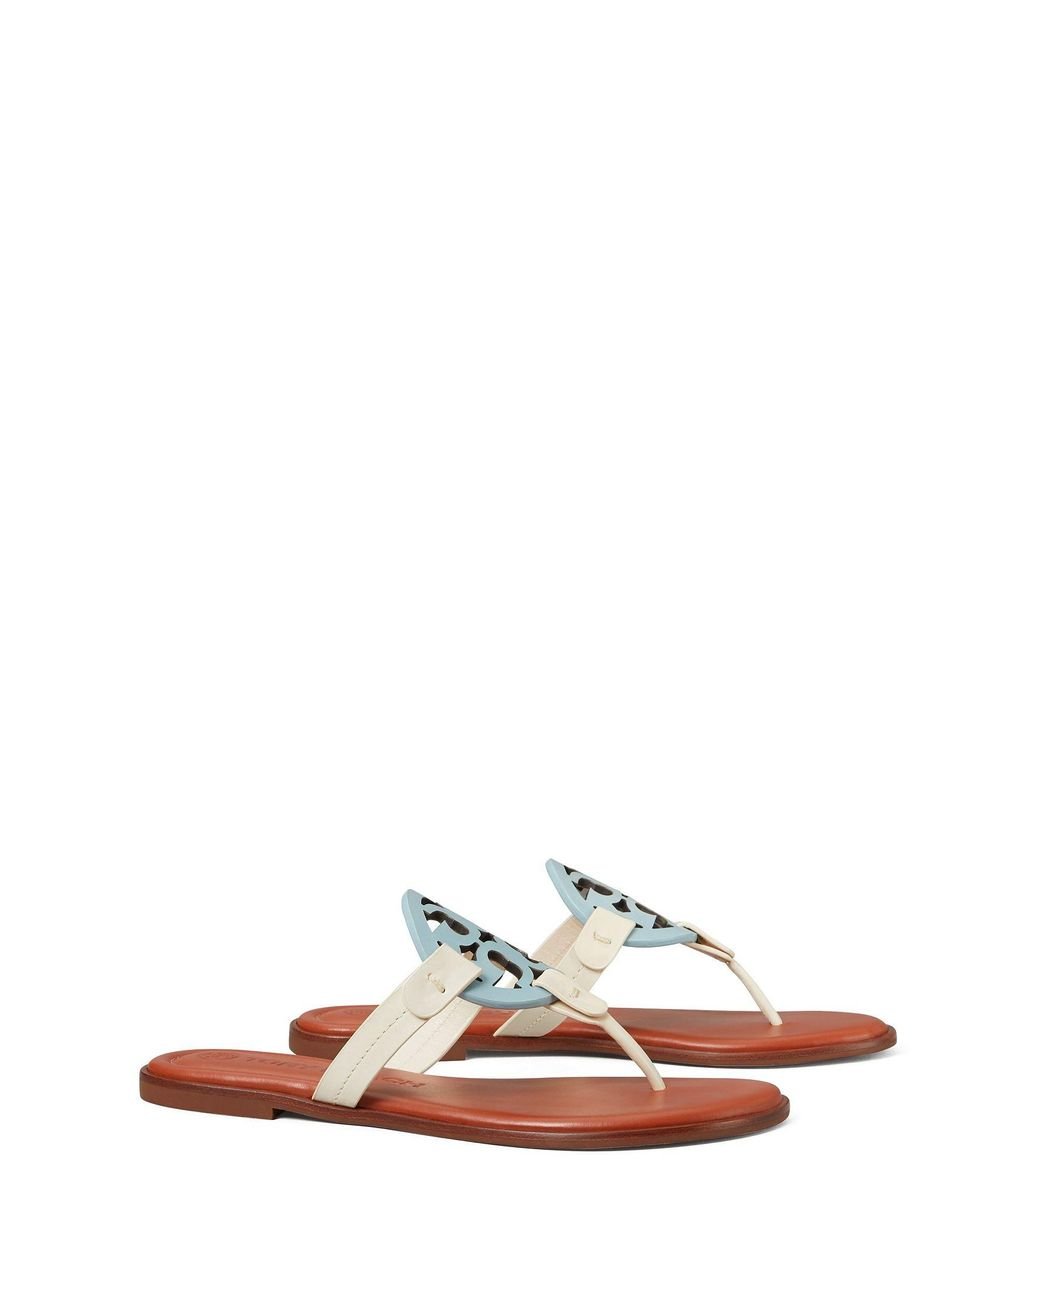 Tory Burch Miller Sandal, Leather, Extended Width | Lyst